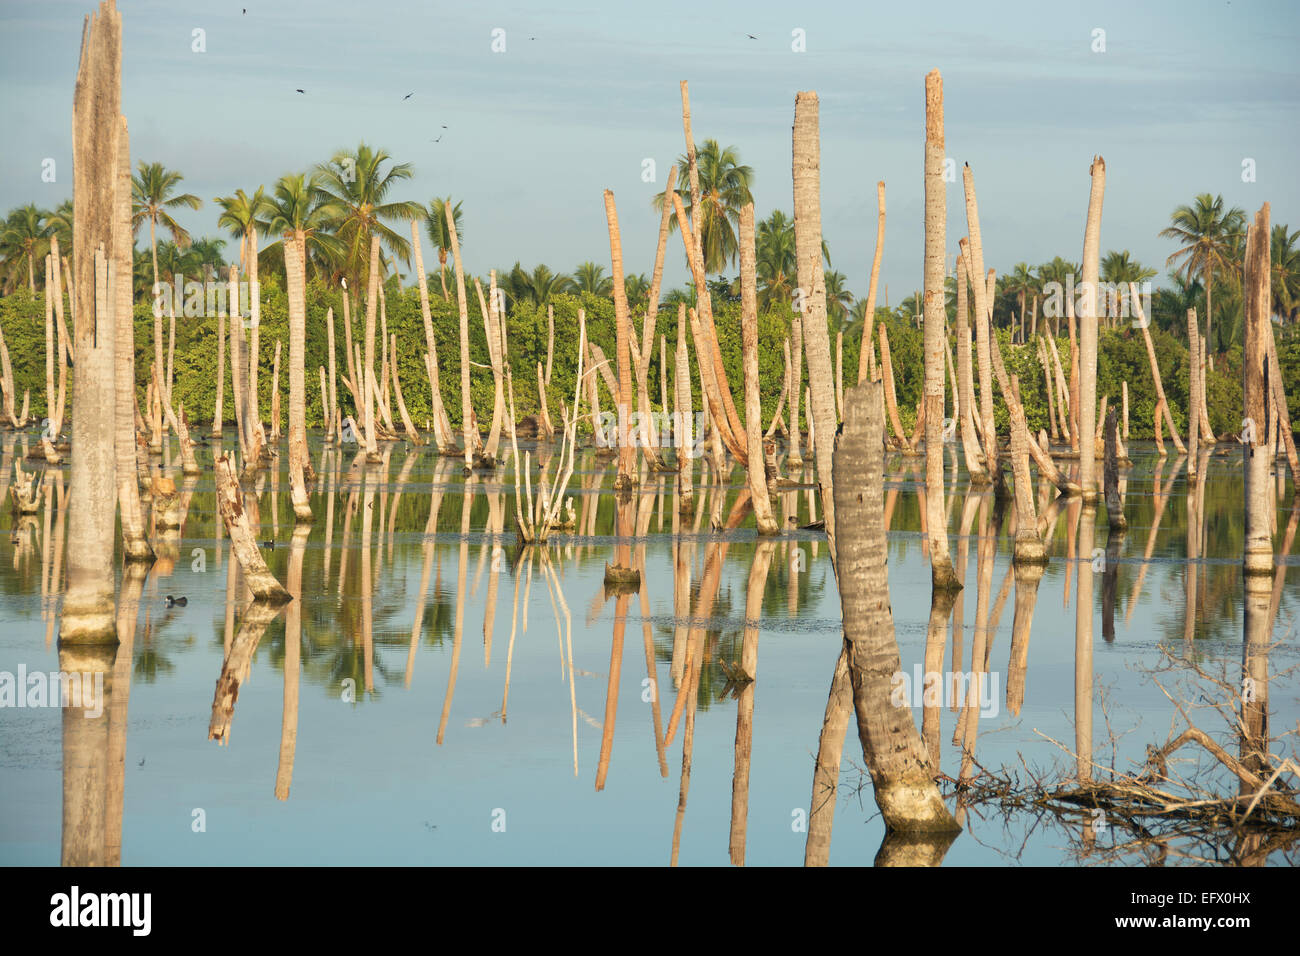 DOMINICAN REPUBLIC. Palm tree trunks reflected in swampy waters at Punta Cana lagoon. Stock Photo